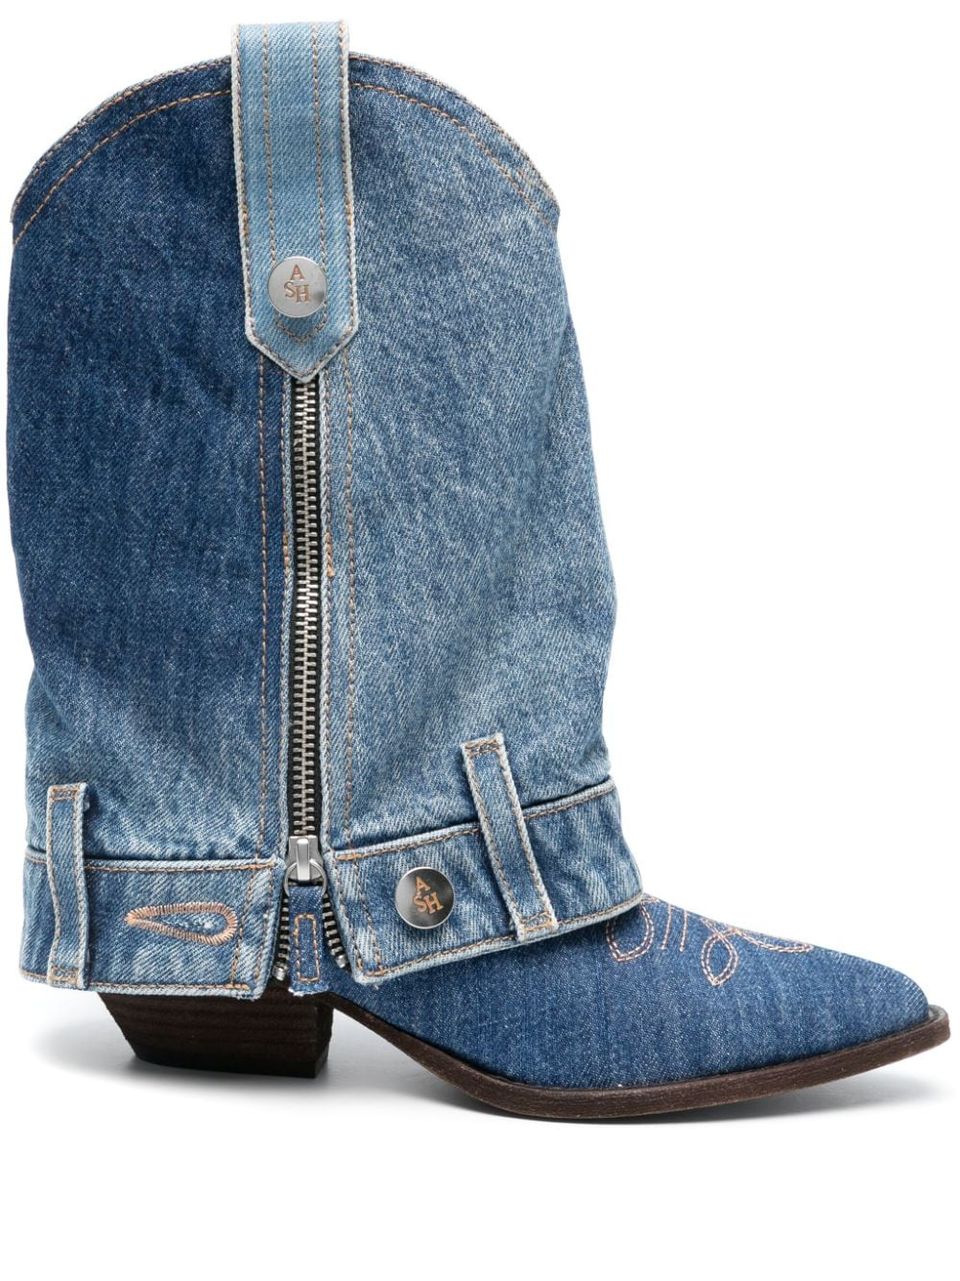 Western-style boots with zip design